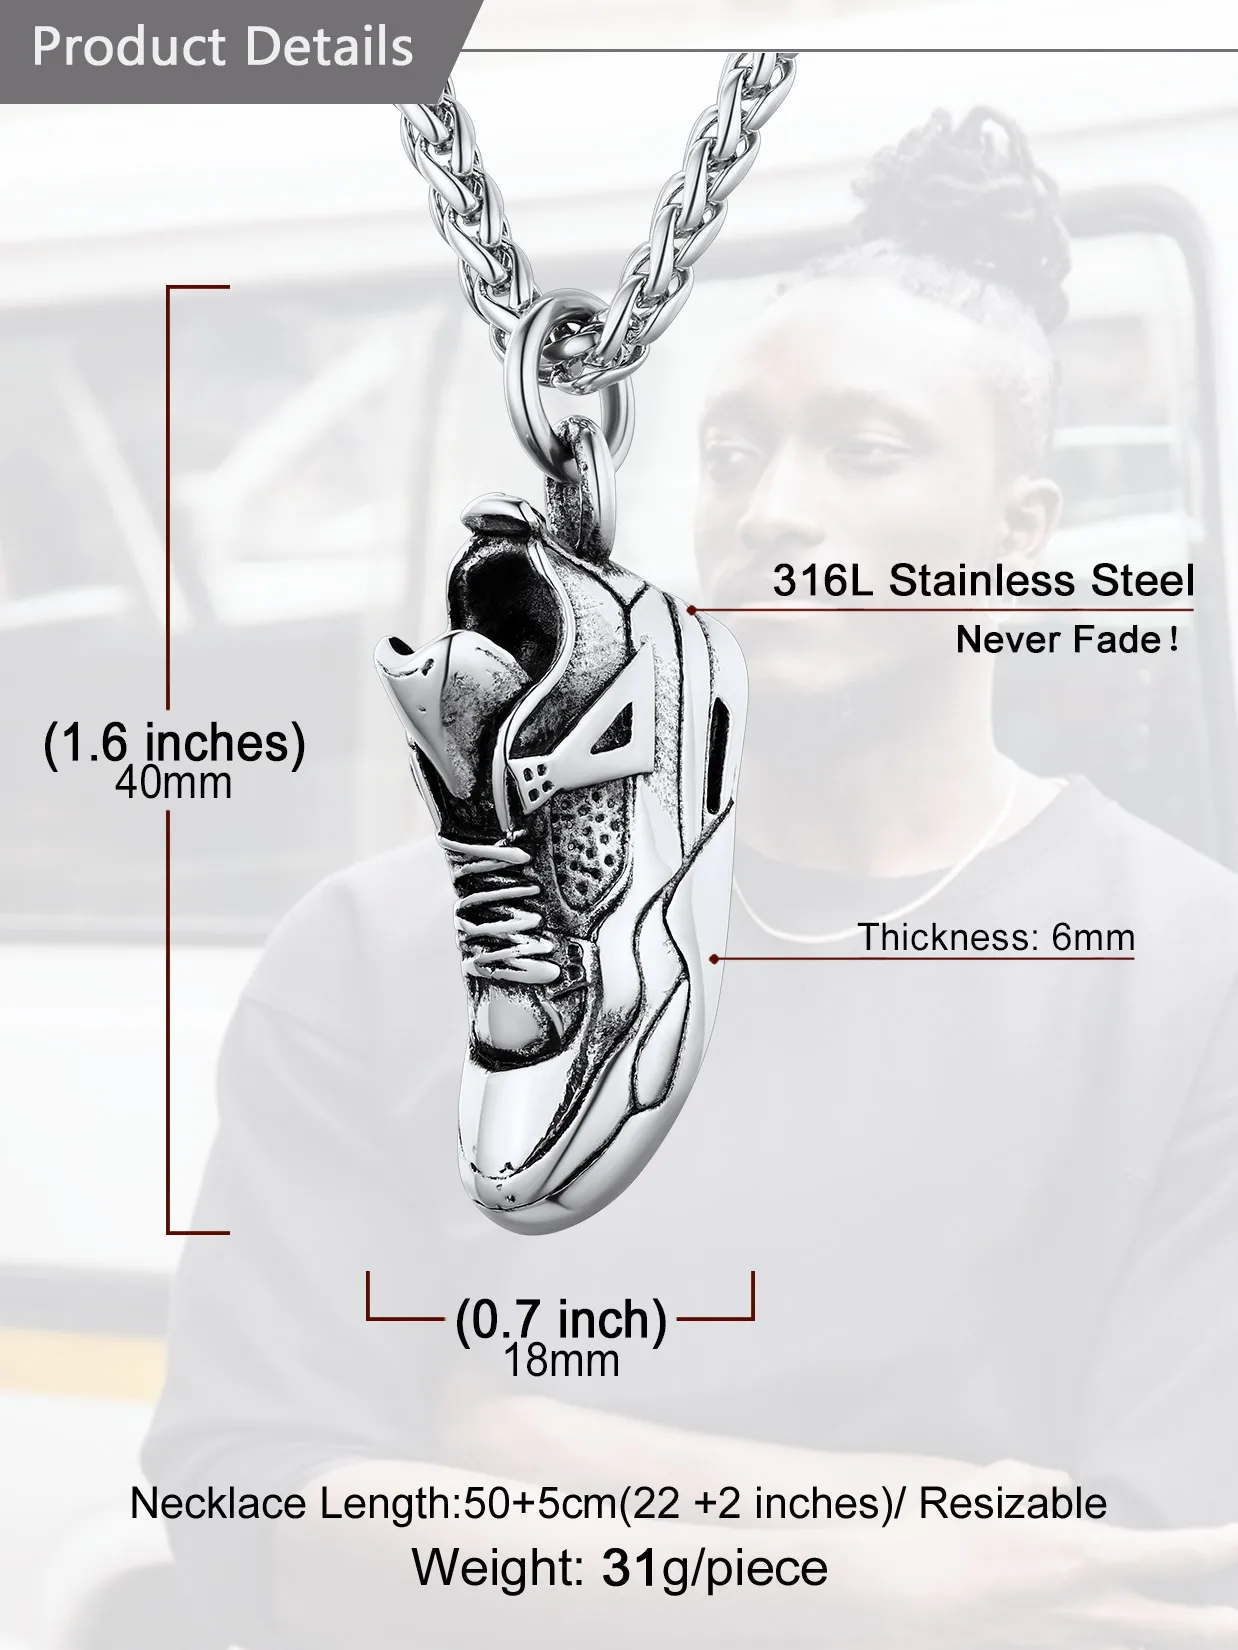 U7 Stainless Steel Sneaker Necklace for Man Black Gold Color Running Sport Shoe Charm Runner Sport Lover Steampunk Punk Jewelry